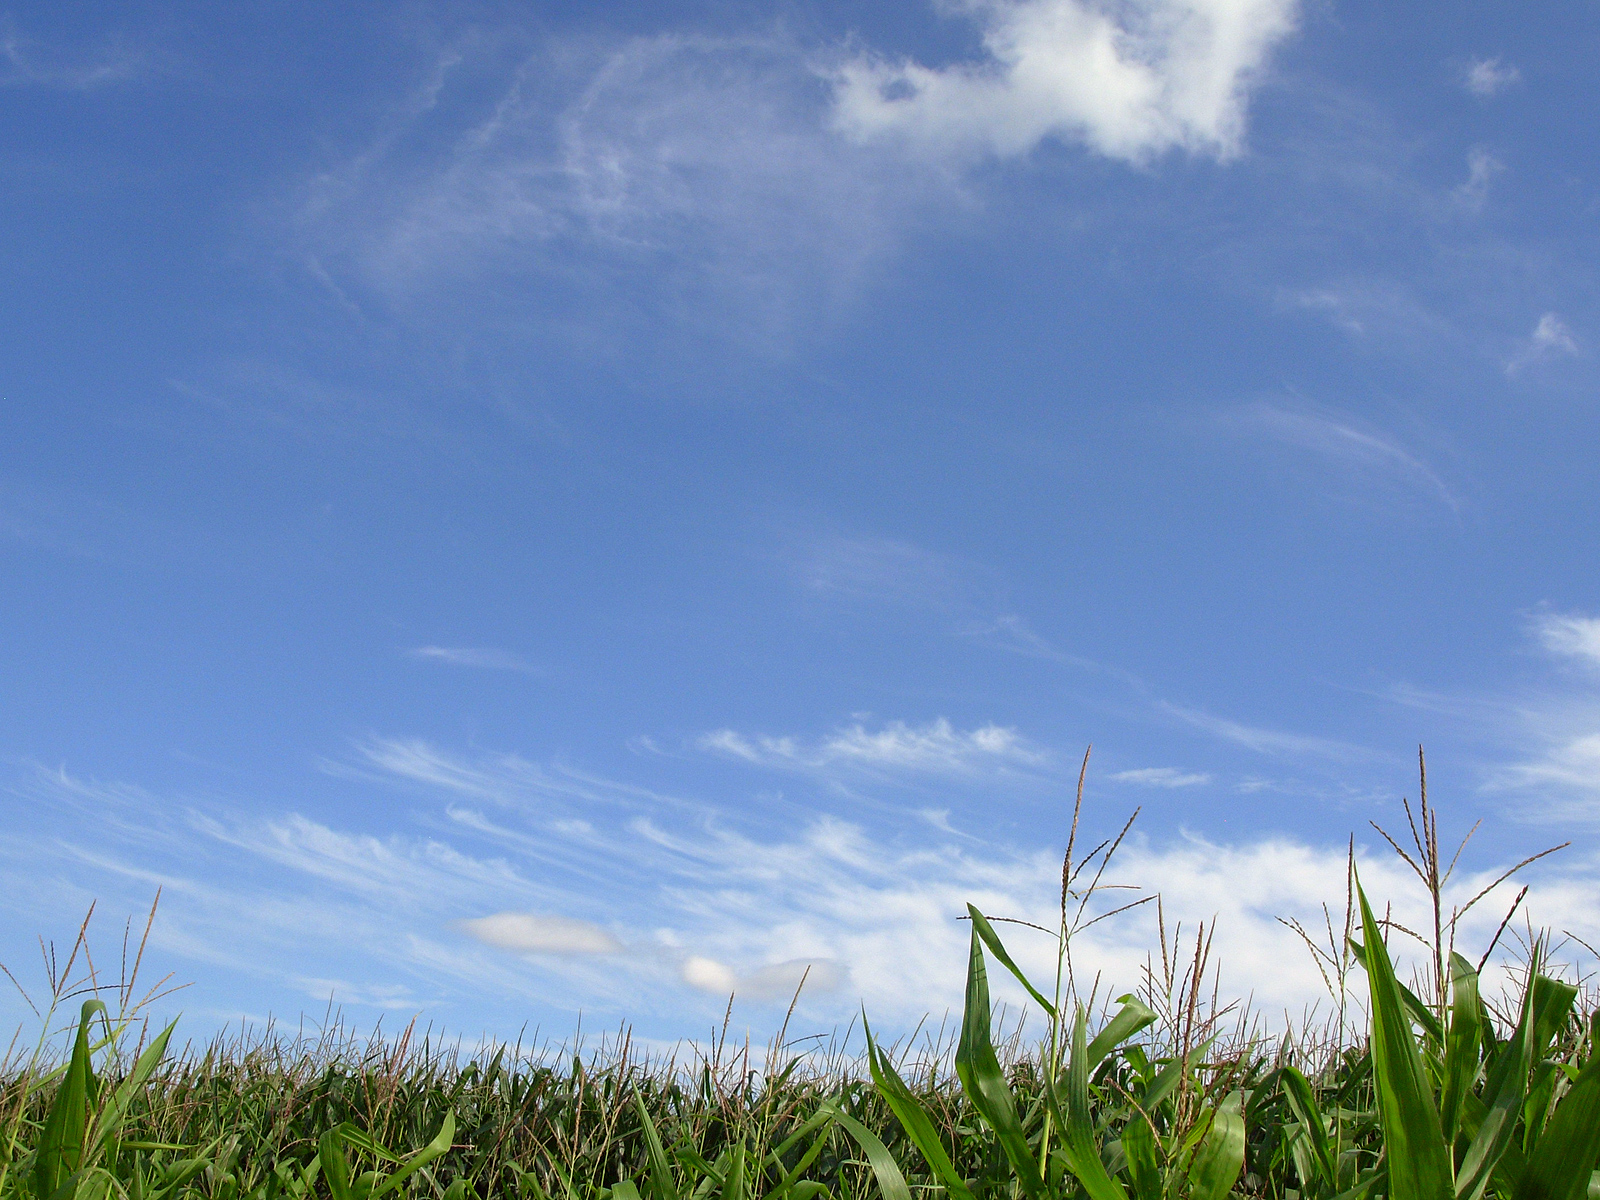 Grass and sky, Blue, Clouds, Grass, Green, HQ Photo